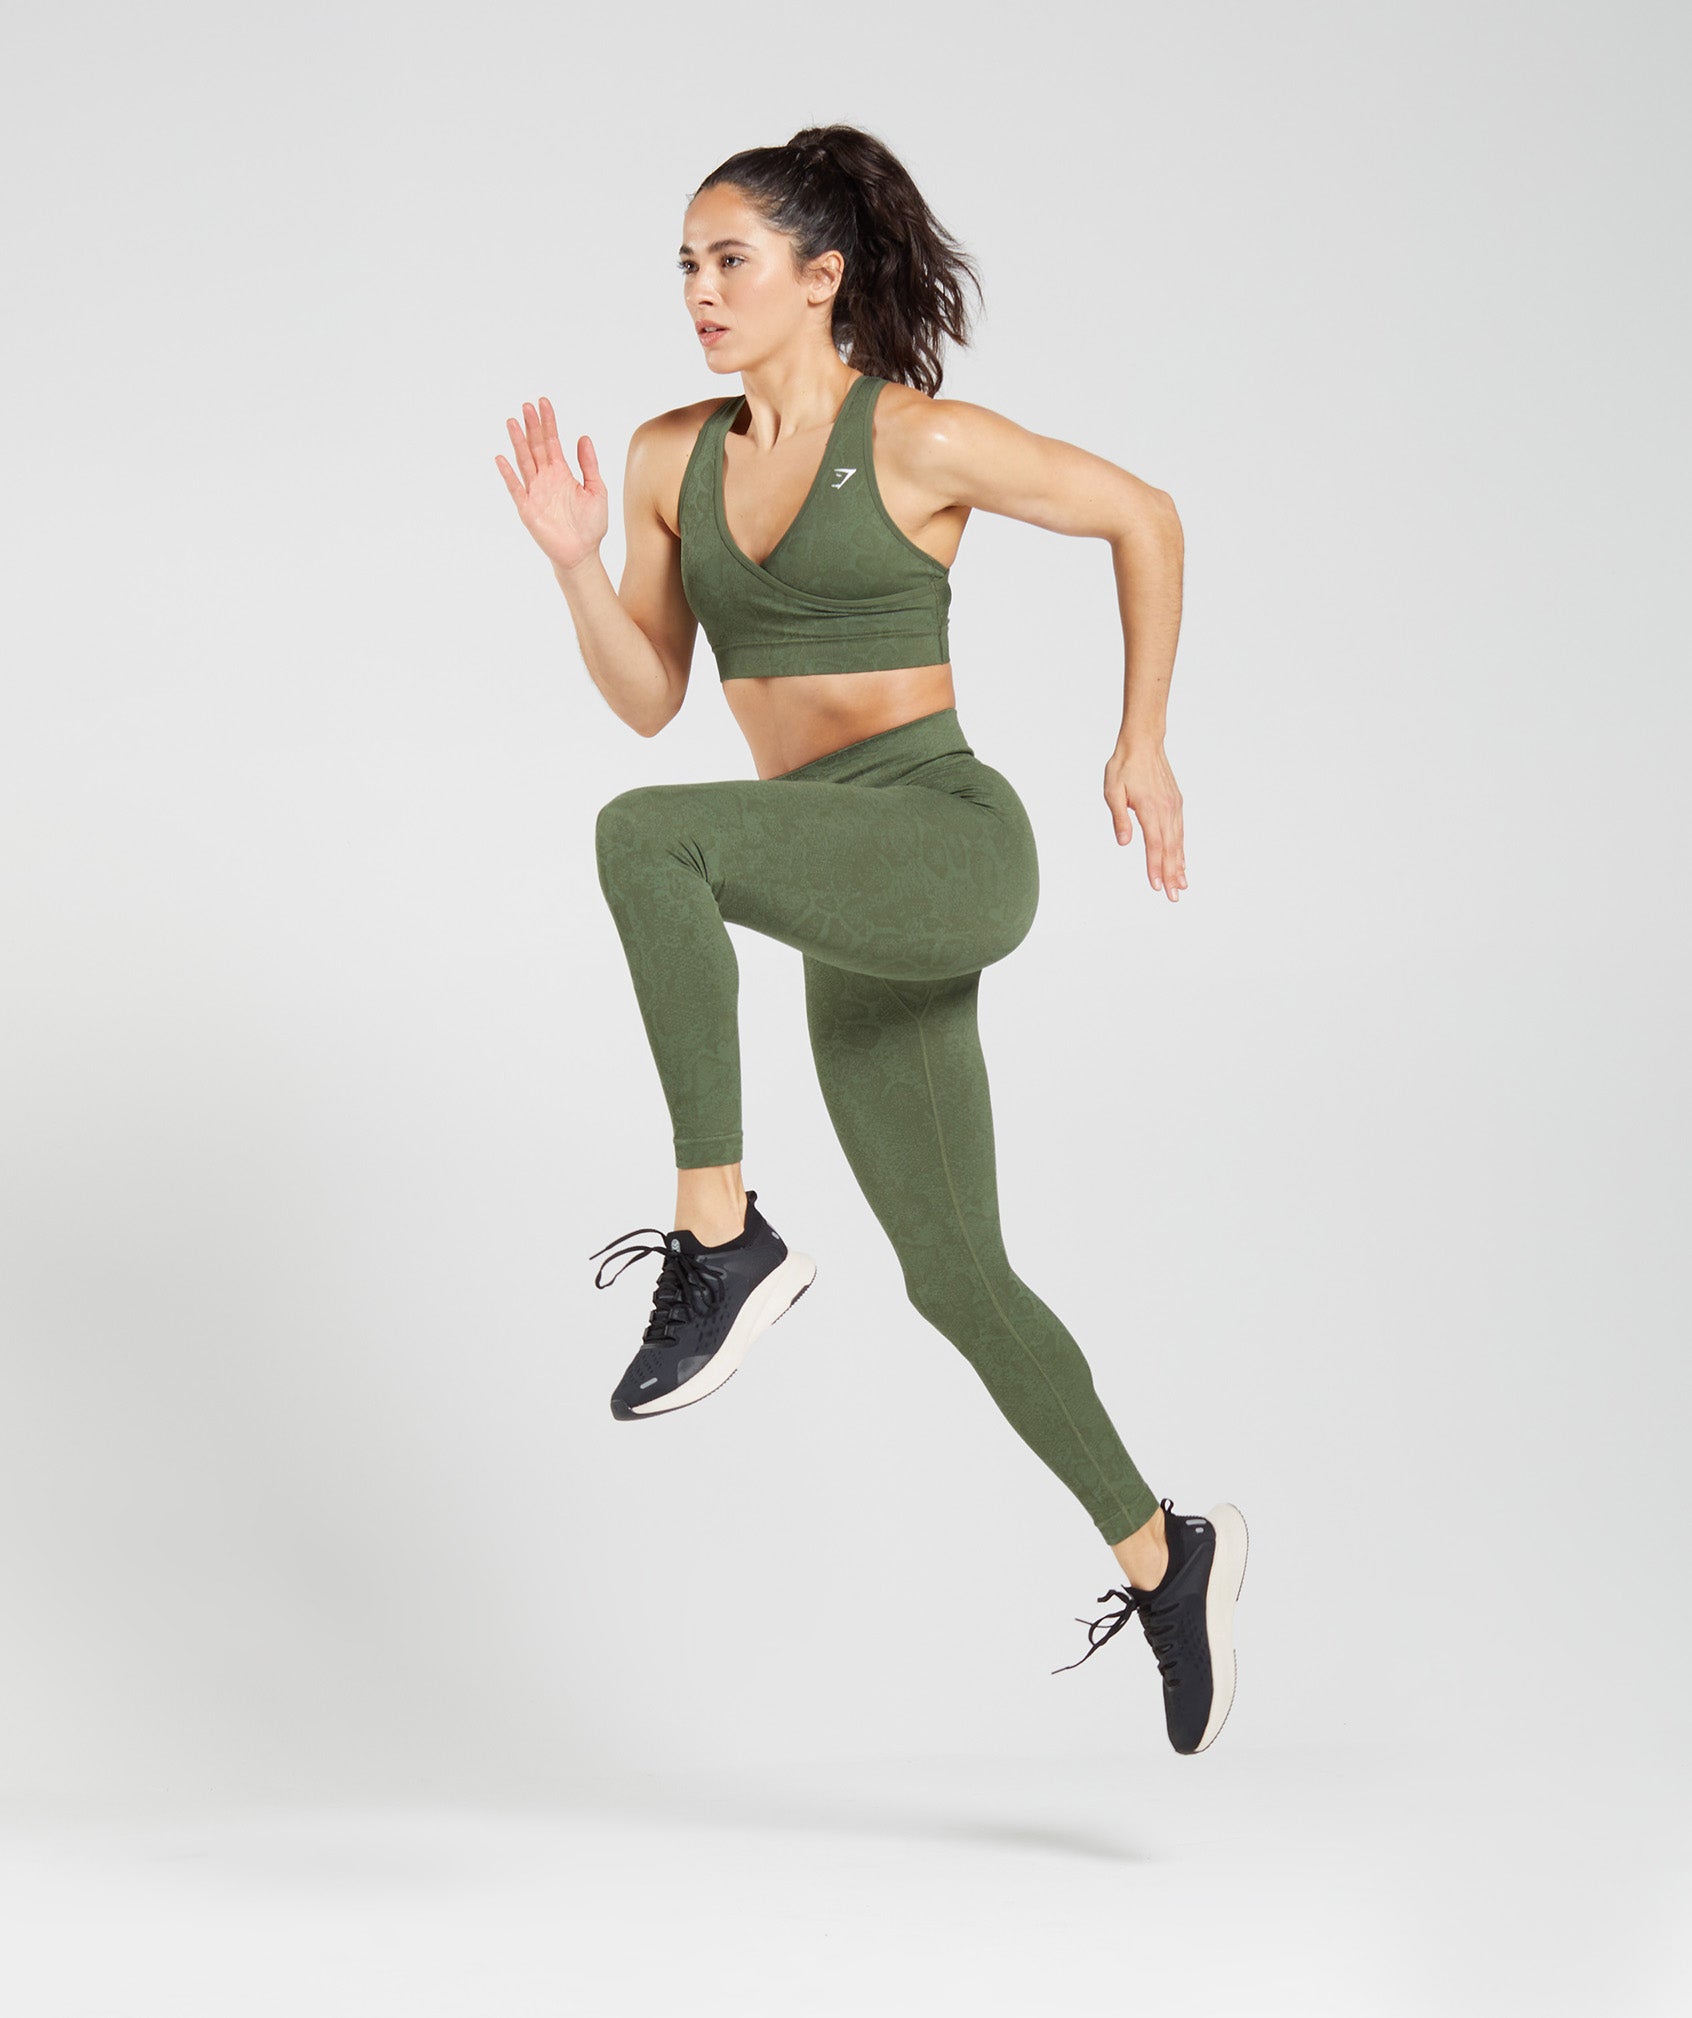 Adapt Animal Seamless Leggings in Willow Green/Core Olive